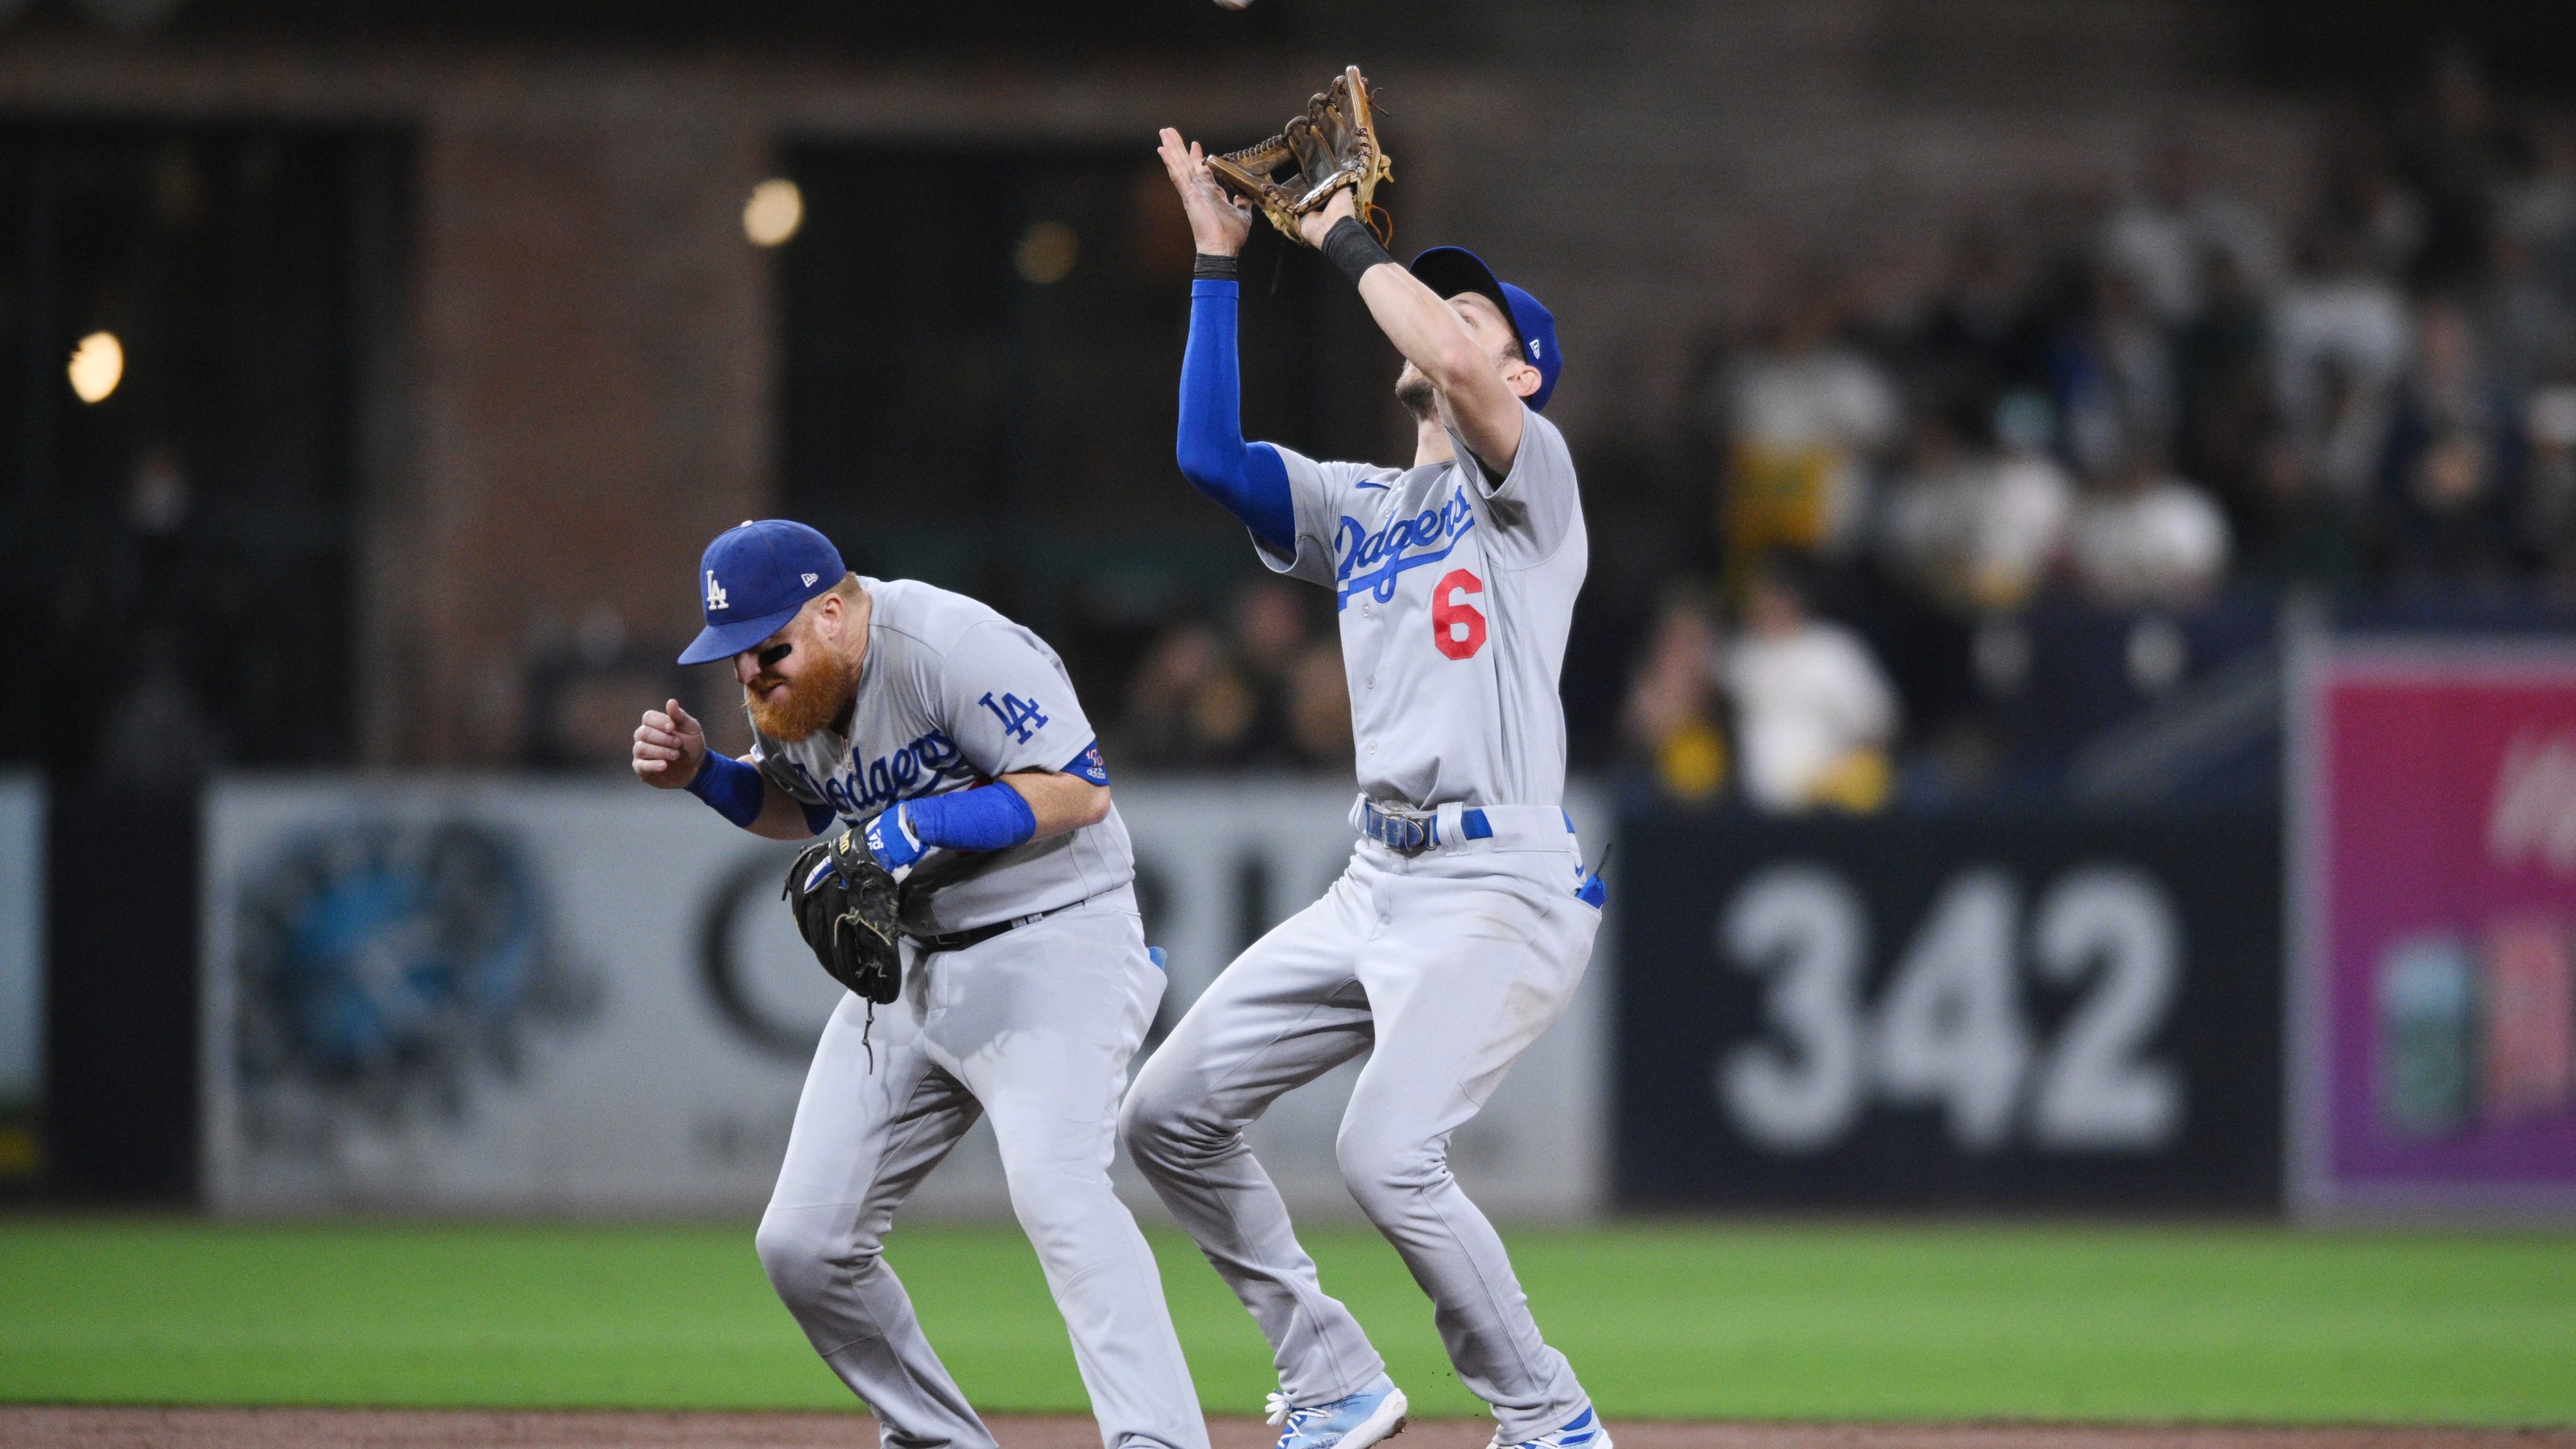 Hey Dodgers fans, you still won 111 games so don't look at the season as a failure